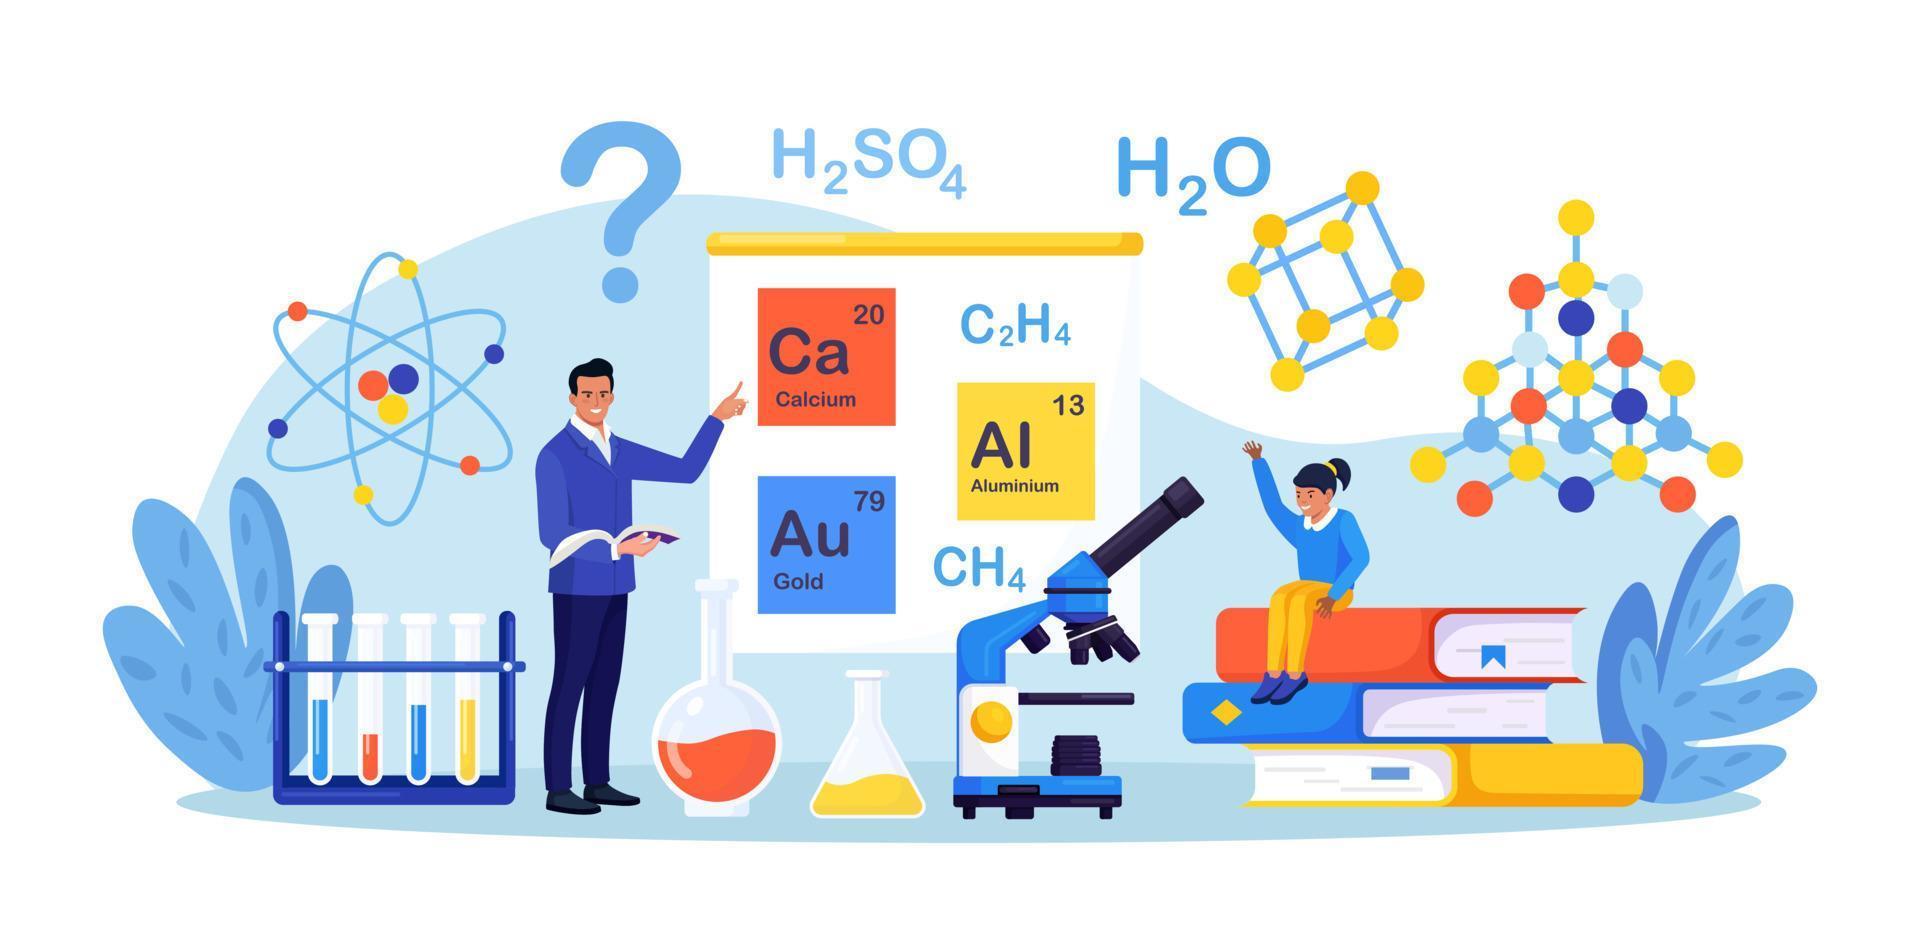 Chemistry school lesson. Pupil learning chemical formula, elements. Scientific experiment in laboratory with chemistry flasks, reagents. Lab scientific researches. Elementary schools education vector